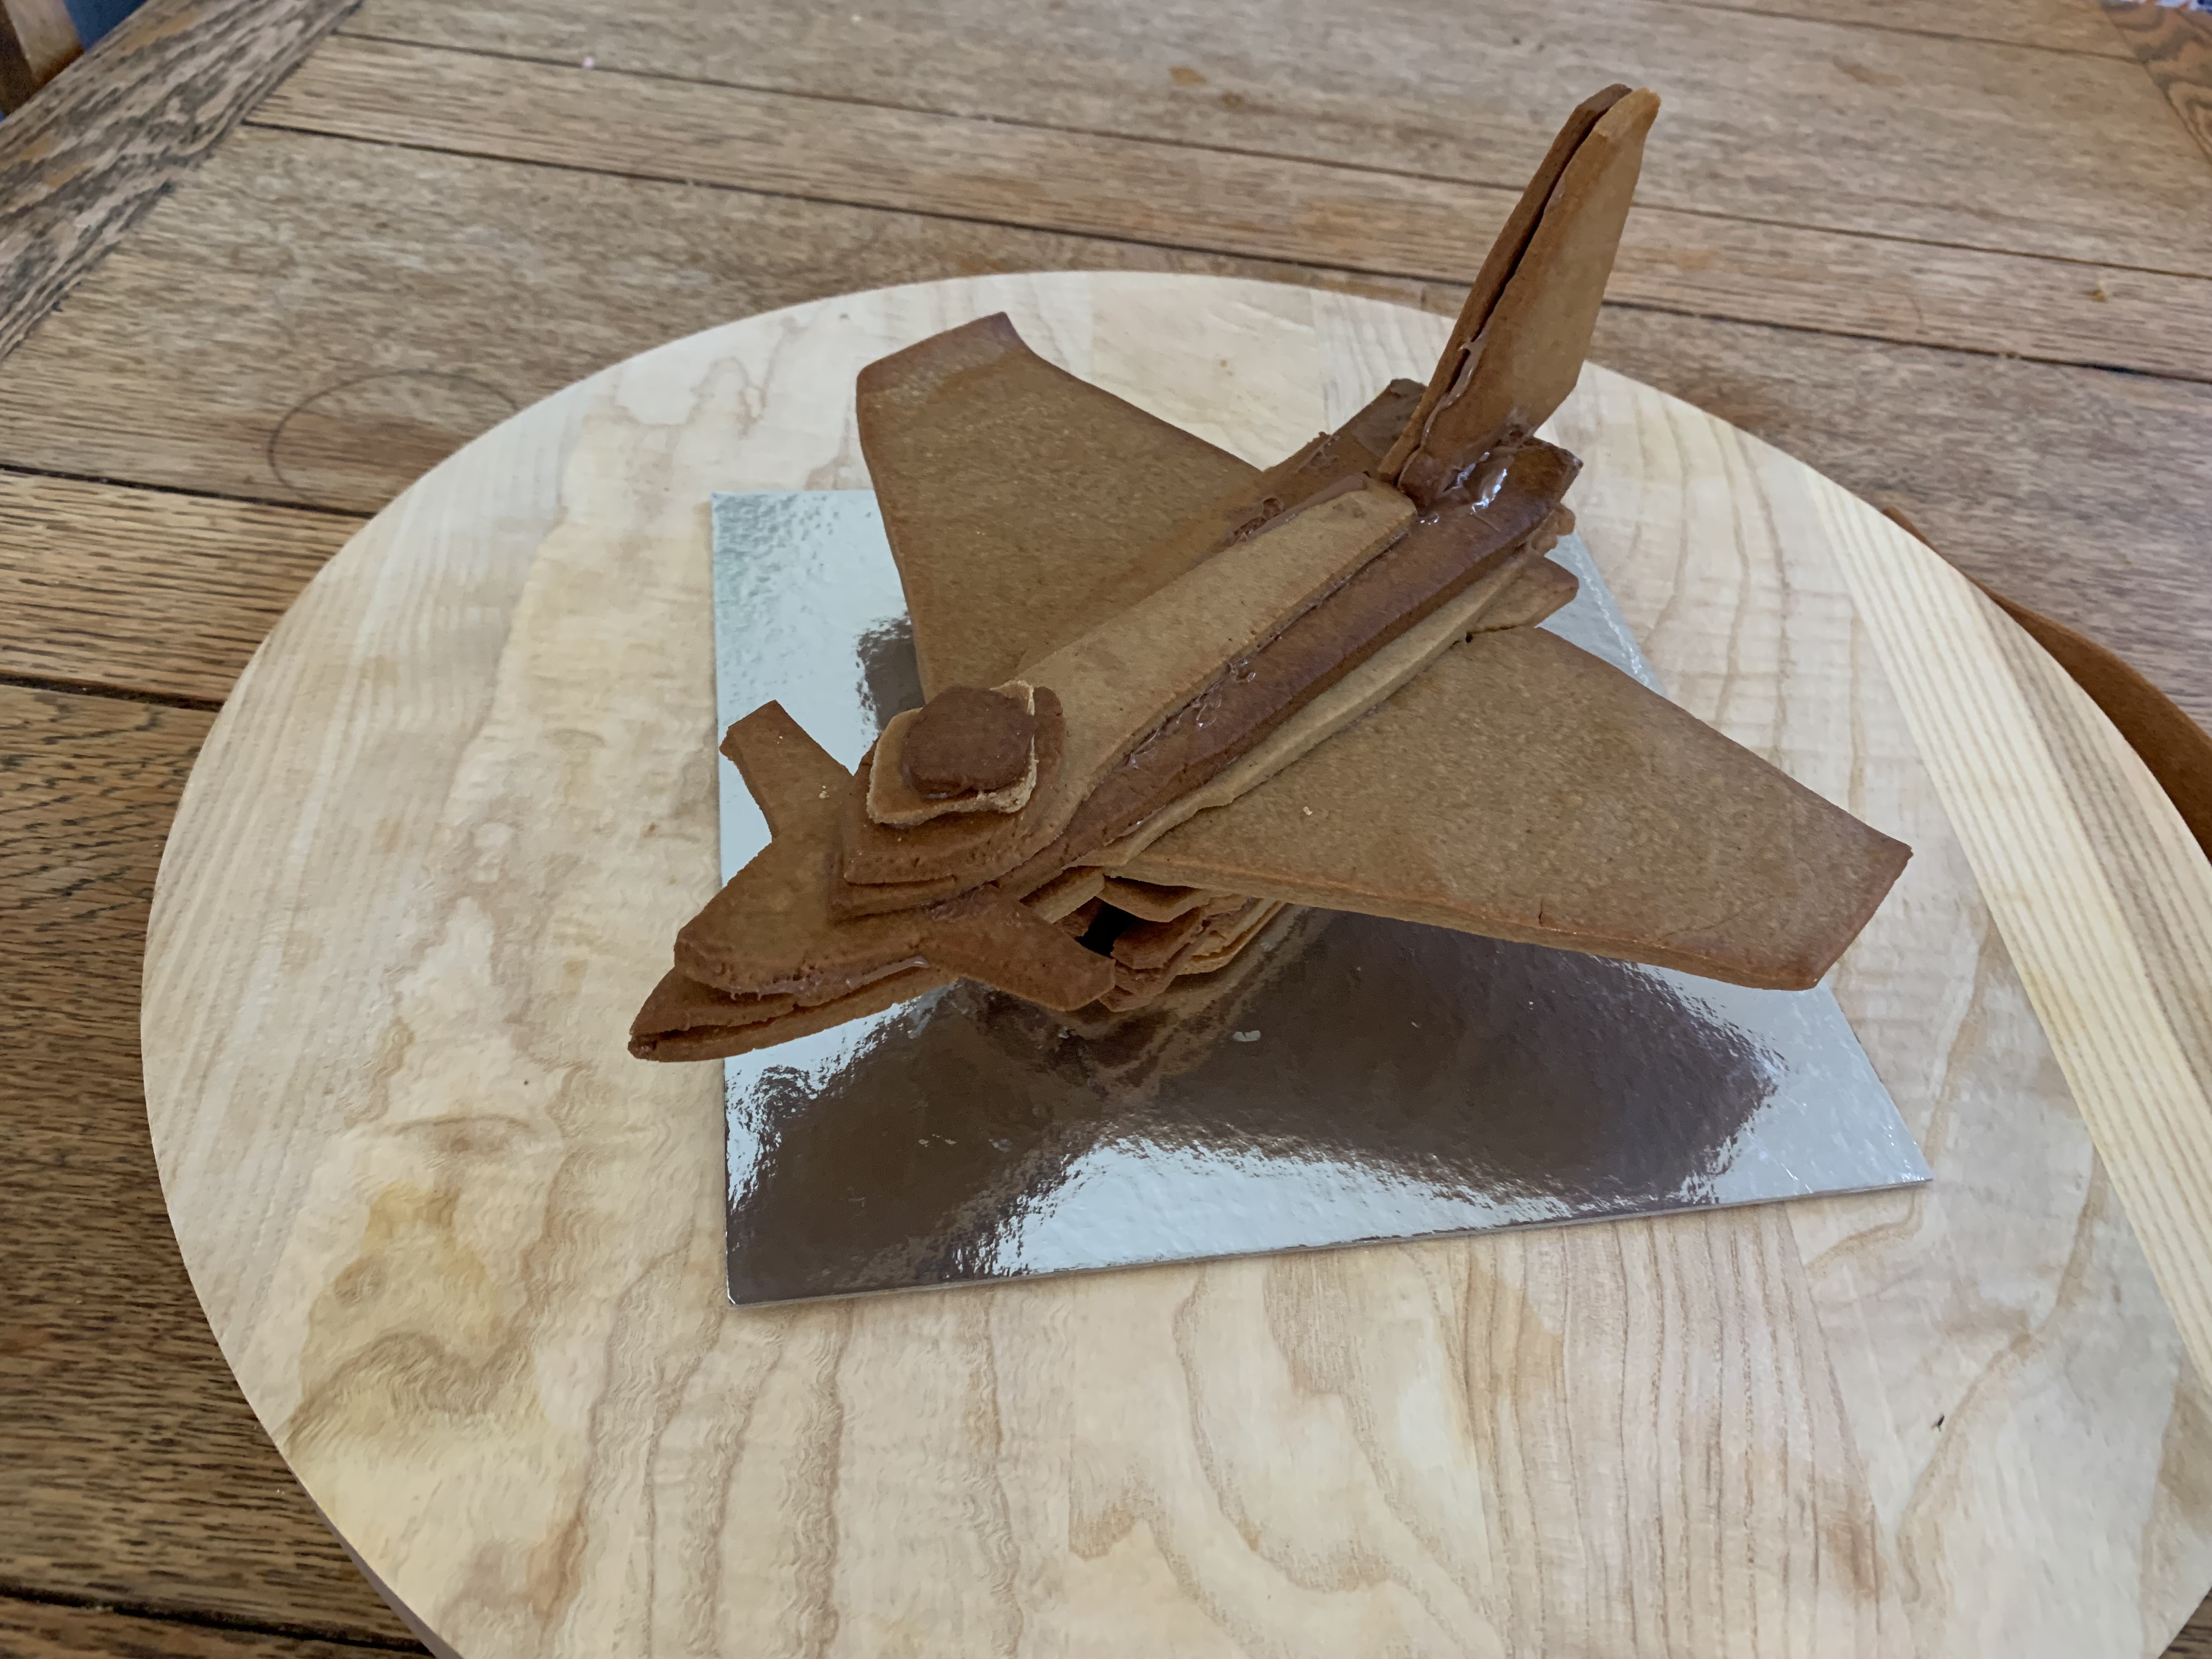 Typhoon made from gingerbread.